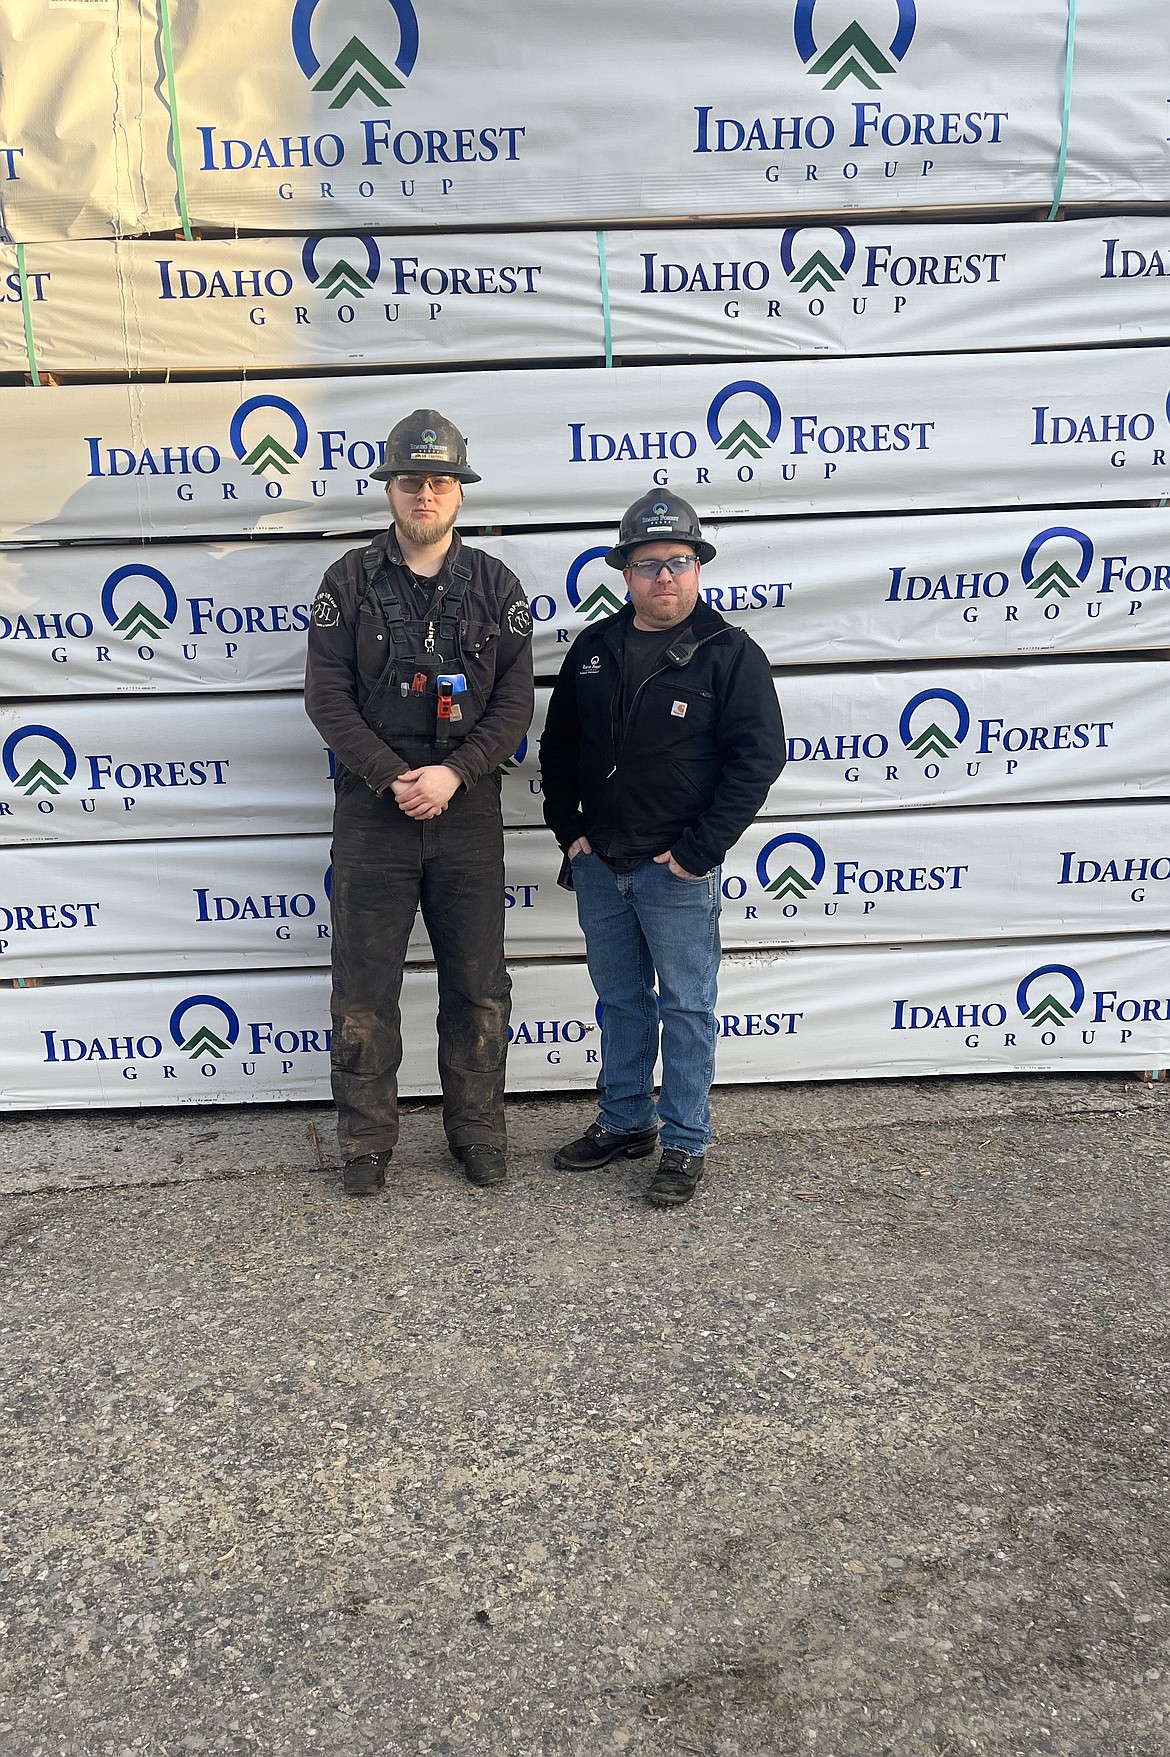 Dylan Chapman poses for a photo with his mentor, David Williams, maintenance manager with IFG Laclede. The Sandpoint High School graduate began working at Idaho Forest Group as a millwright apprentice through the School to Registered program. He recently completed the company's millwright apprenticeship program and is now an industrial electrician apprentice for the company.